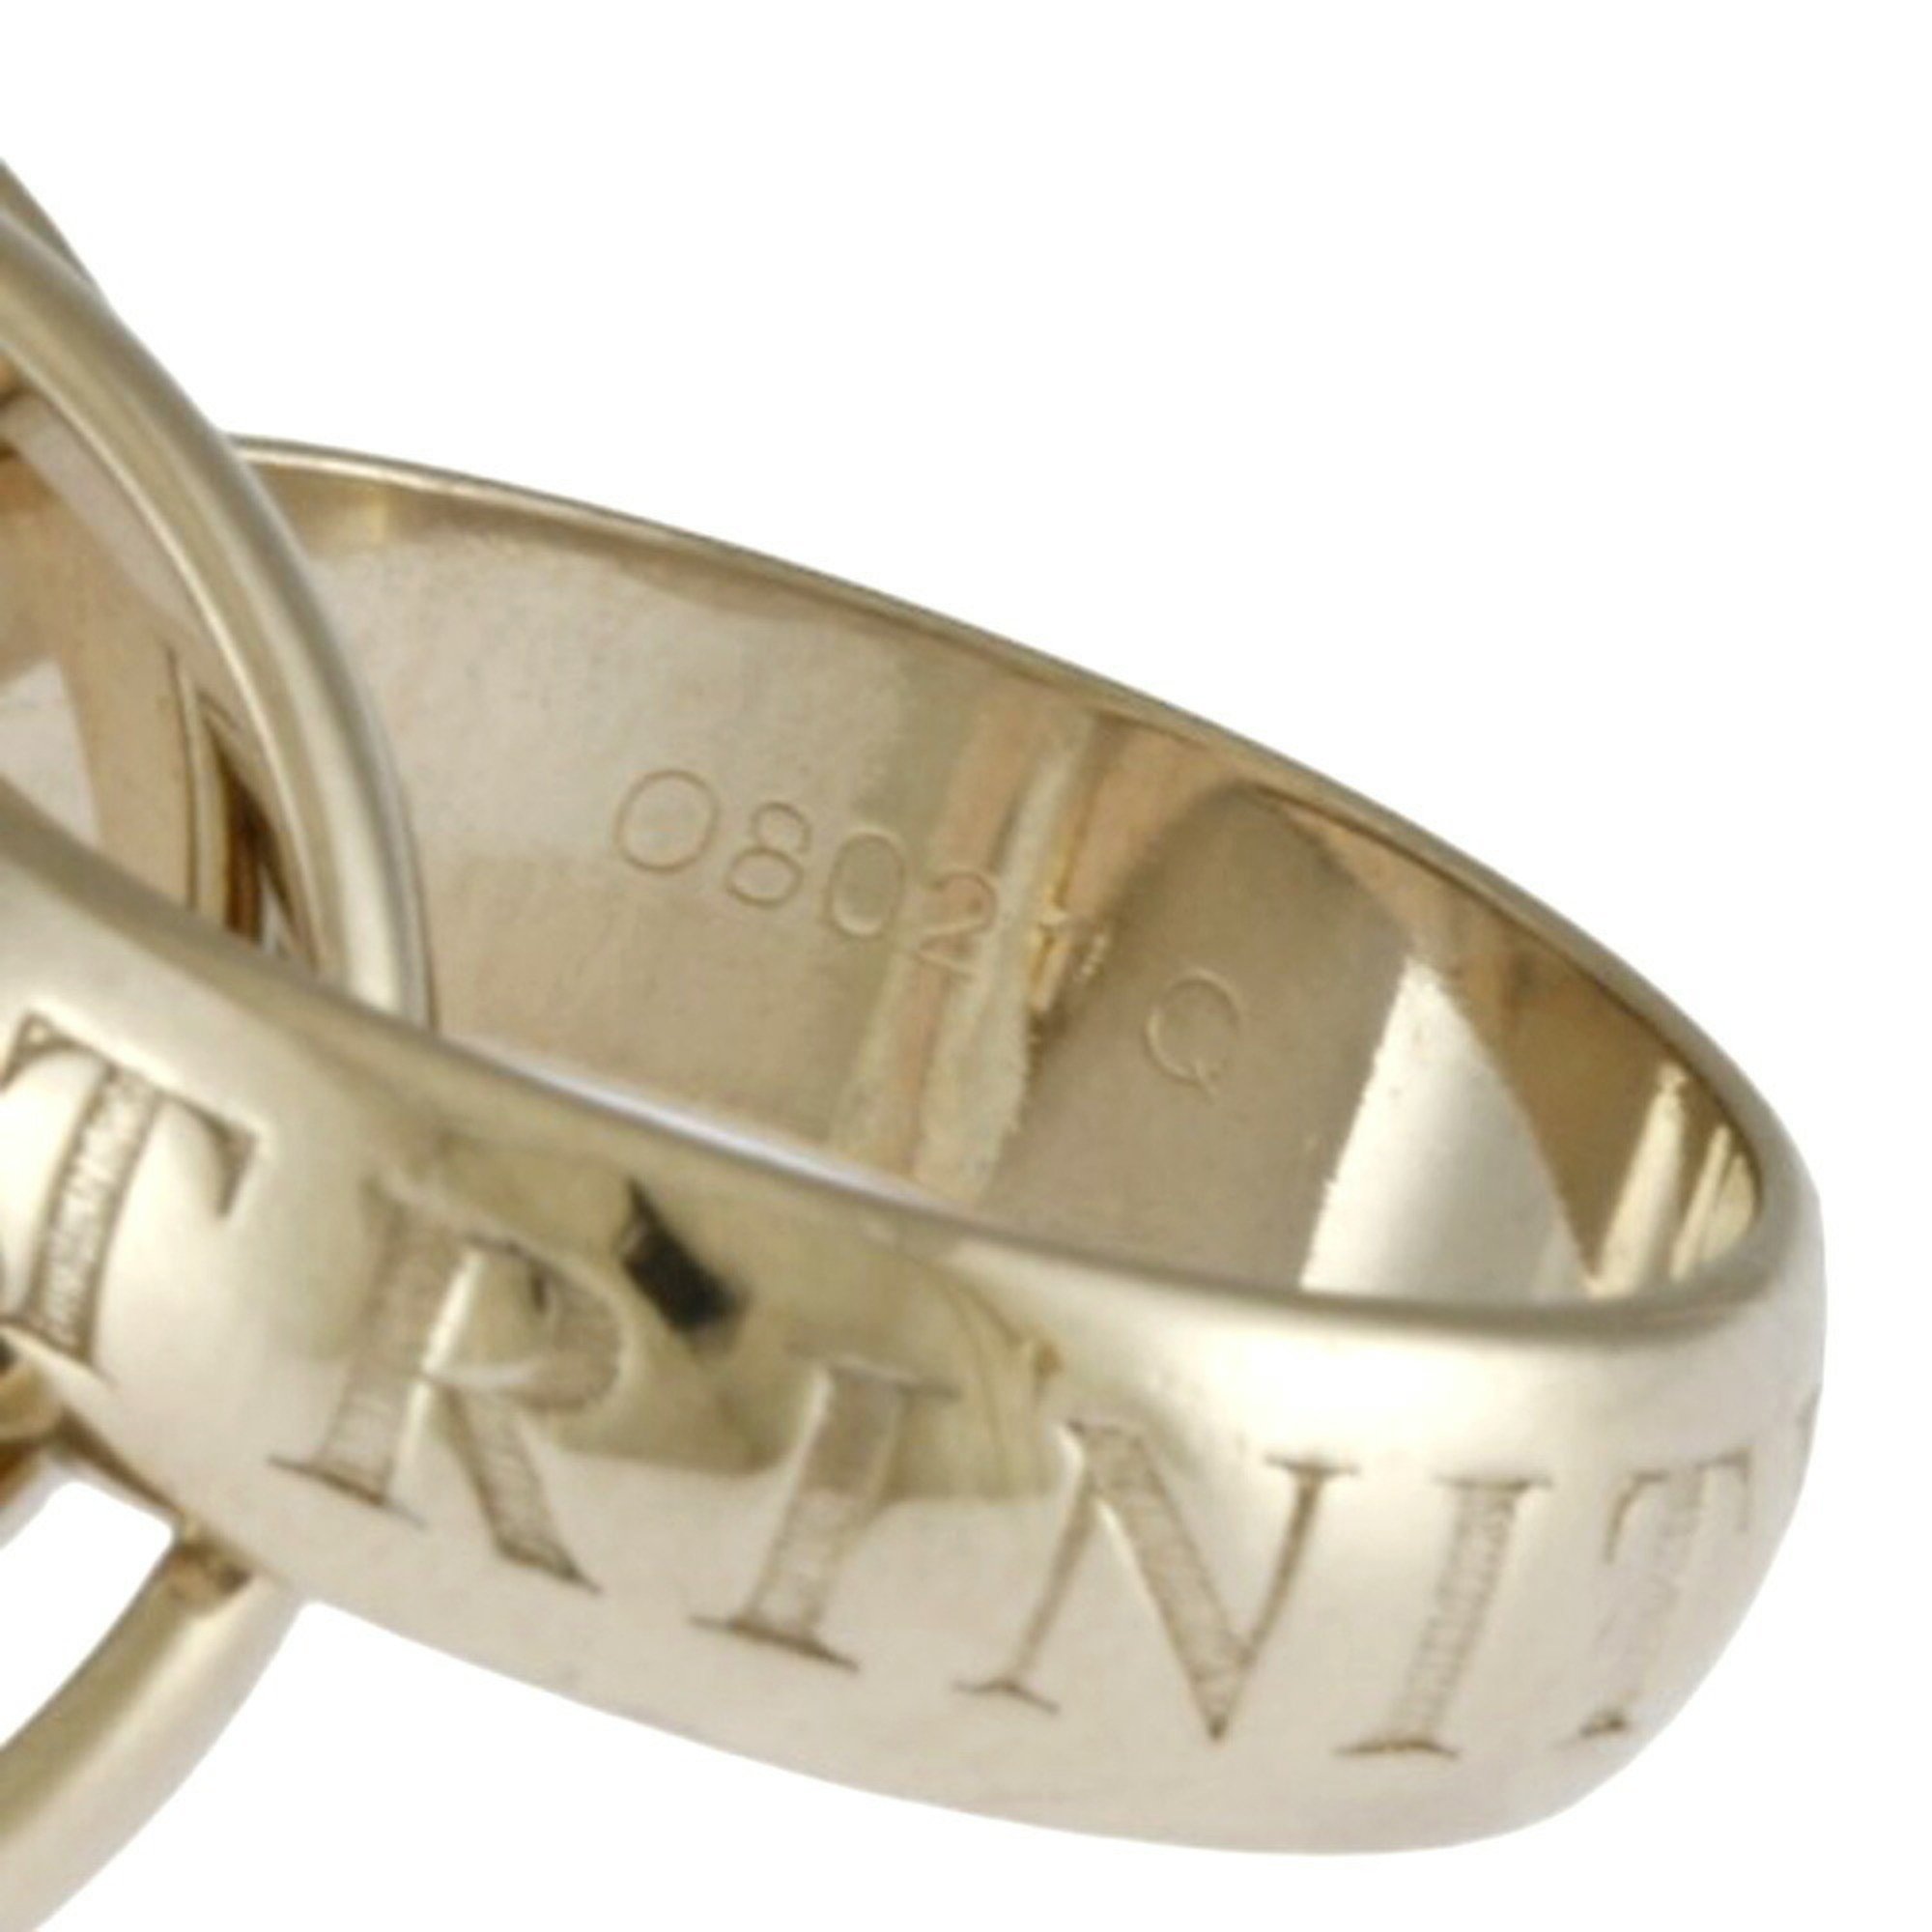 Cartier Trinity 3-Row Ring, Size 8.5, 18K Gold, Women's, CARTIER, Limited Edition